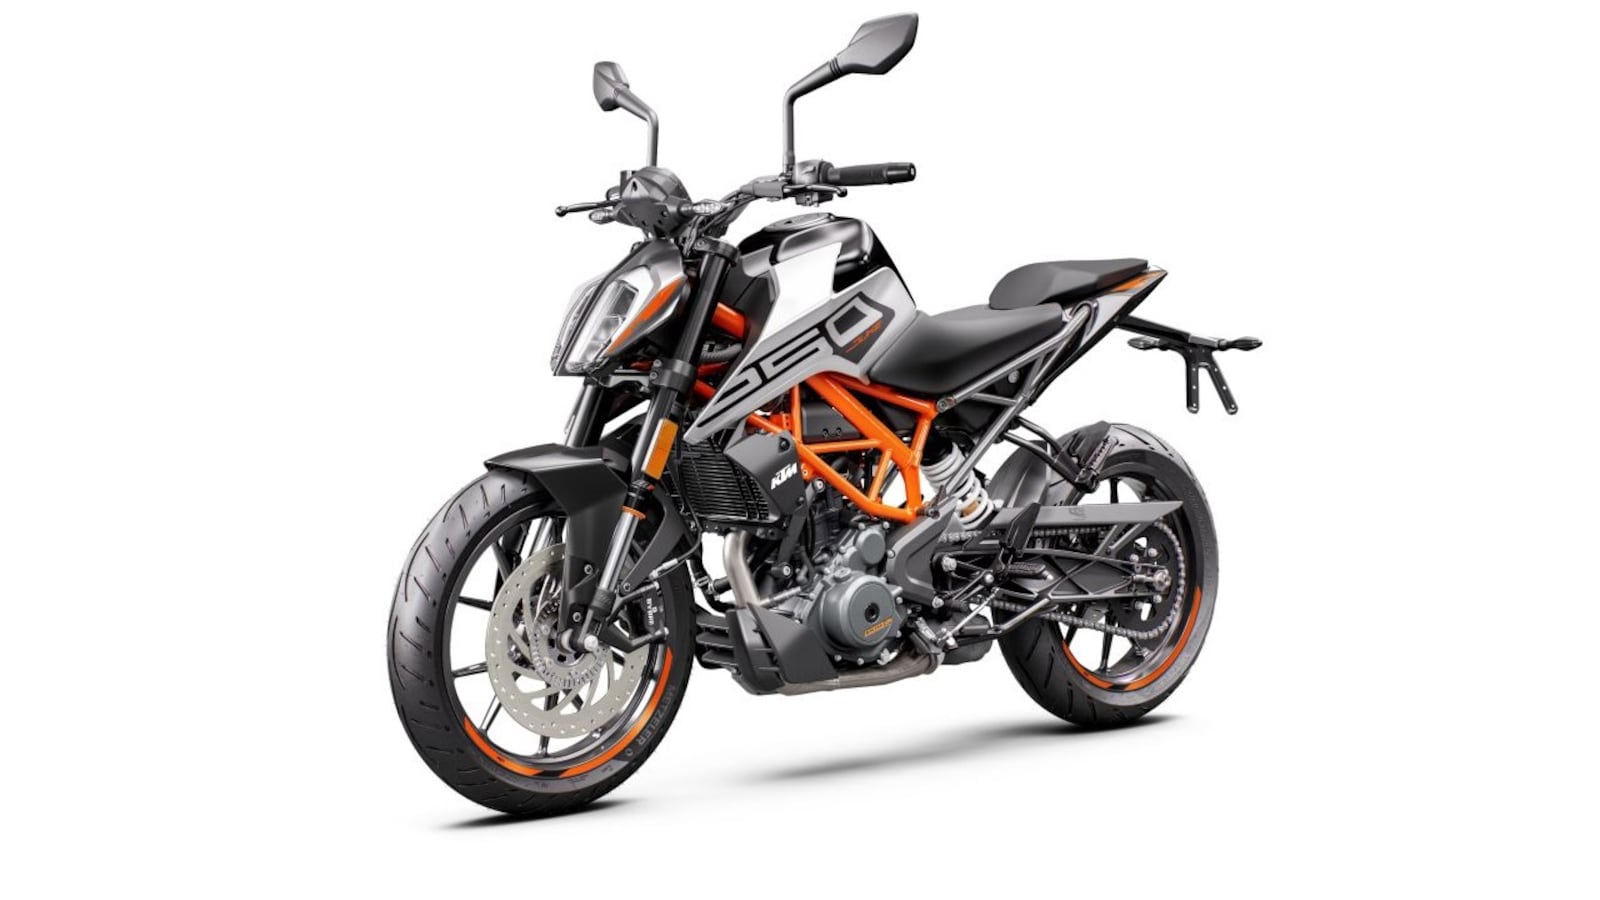 KTM 125 Duke, 250 Duke spied testing; new designs, chassis on the way